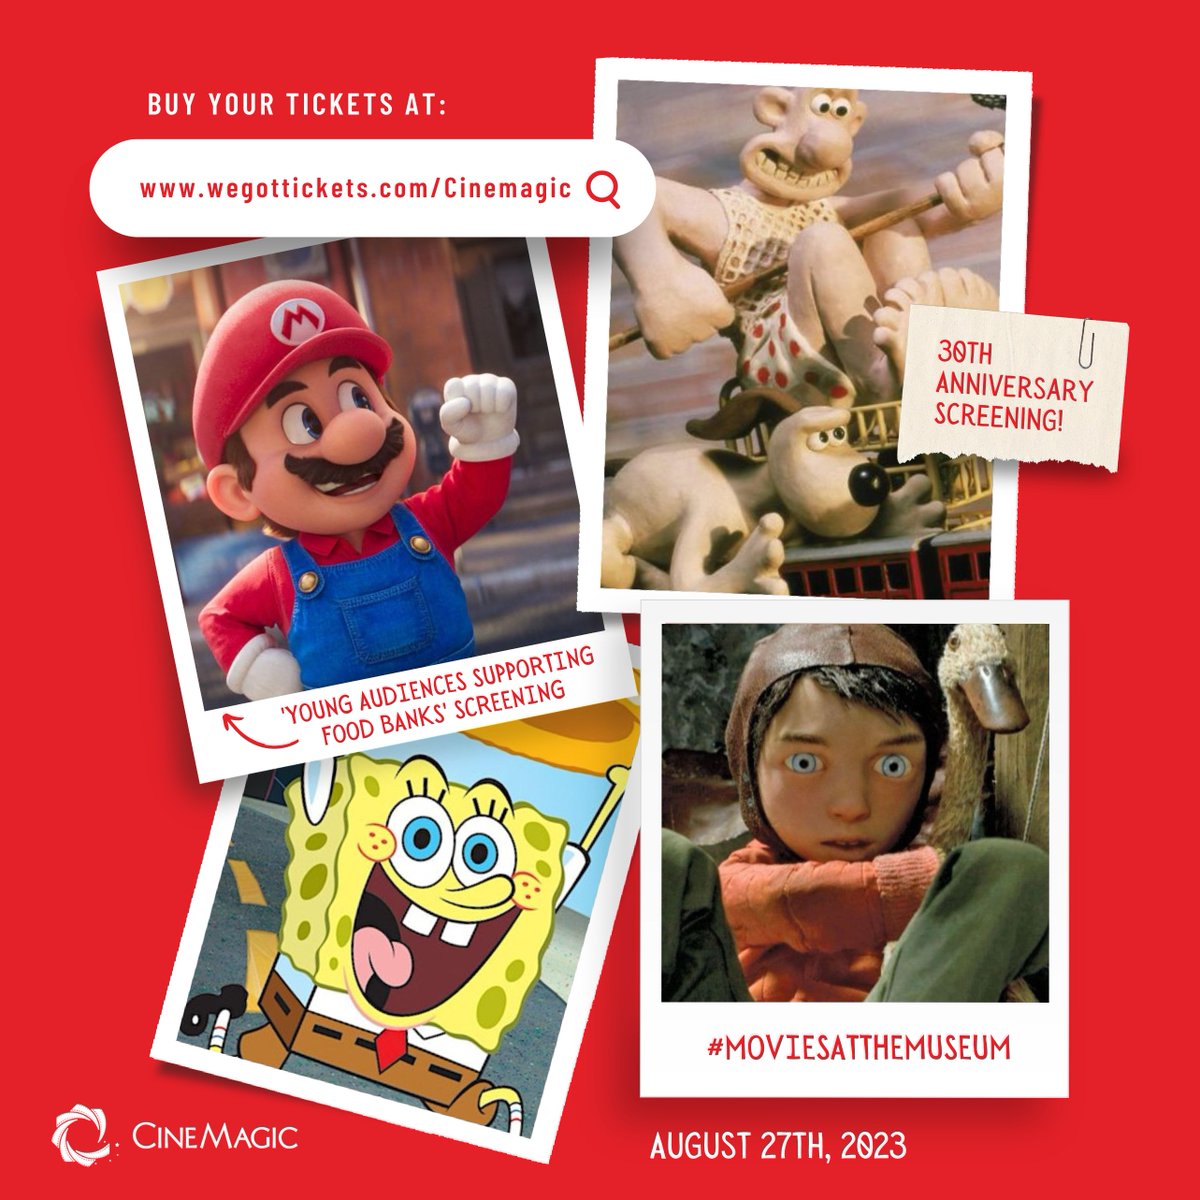 We are so excited about this month’s #MoviesAtTheMuseum programme, we cannot wait to head to the @UlsterMuseum on Sunday the 27th of August.

Visit cinemagic.org.uk to browse and book.

#SuperMarioBros #WallaceAndGromit #Spongebob #PeterAndTheWolf #Cinemagic #BeInspired